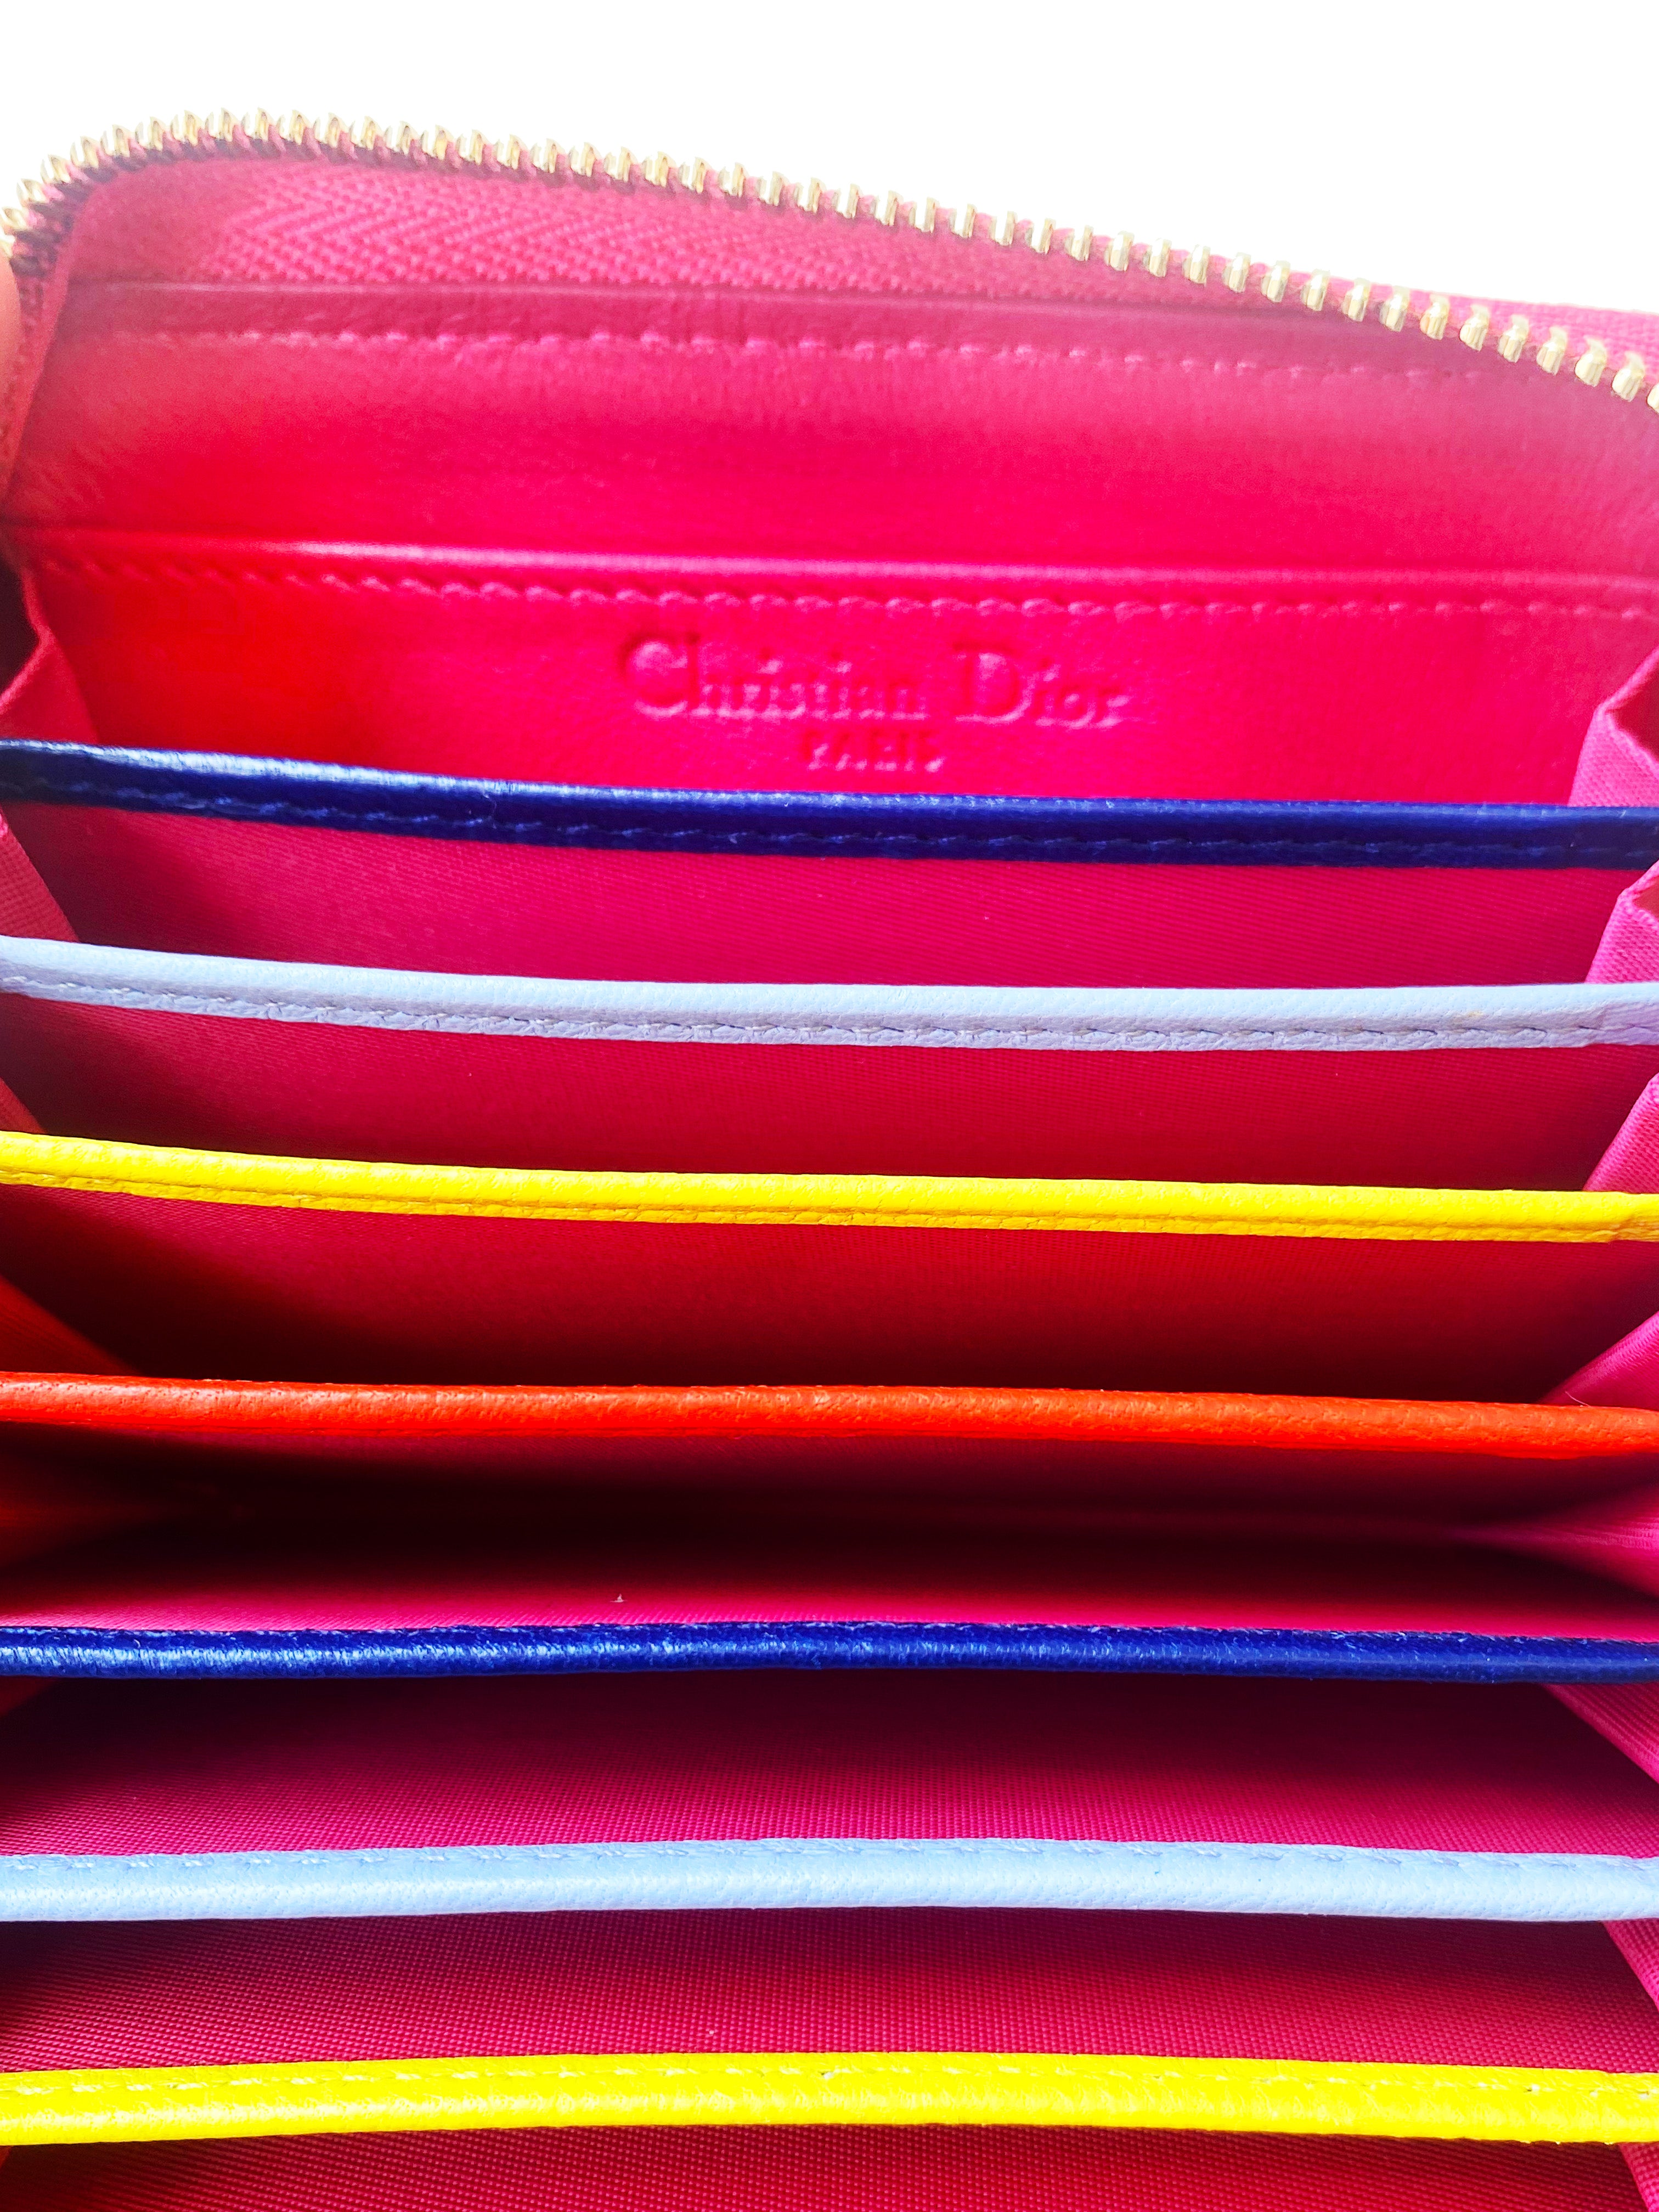 Christian Dior 2000s Hot Pink Lady Dior Wallet with Logo Charm